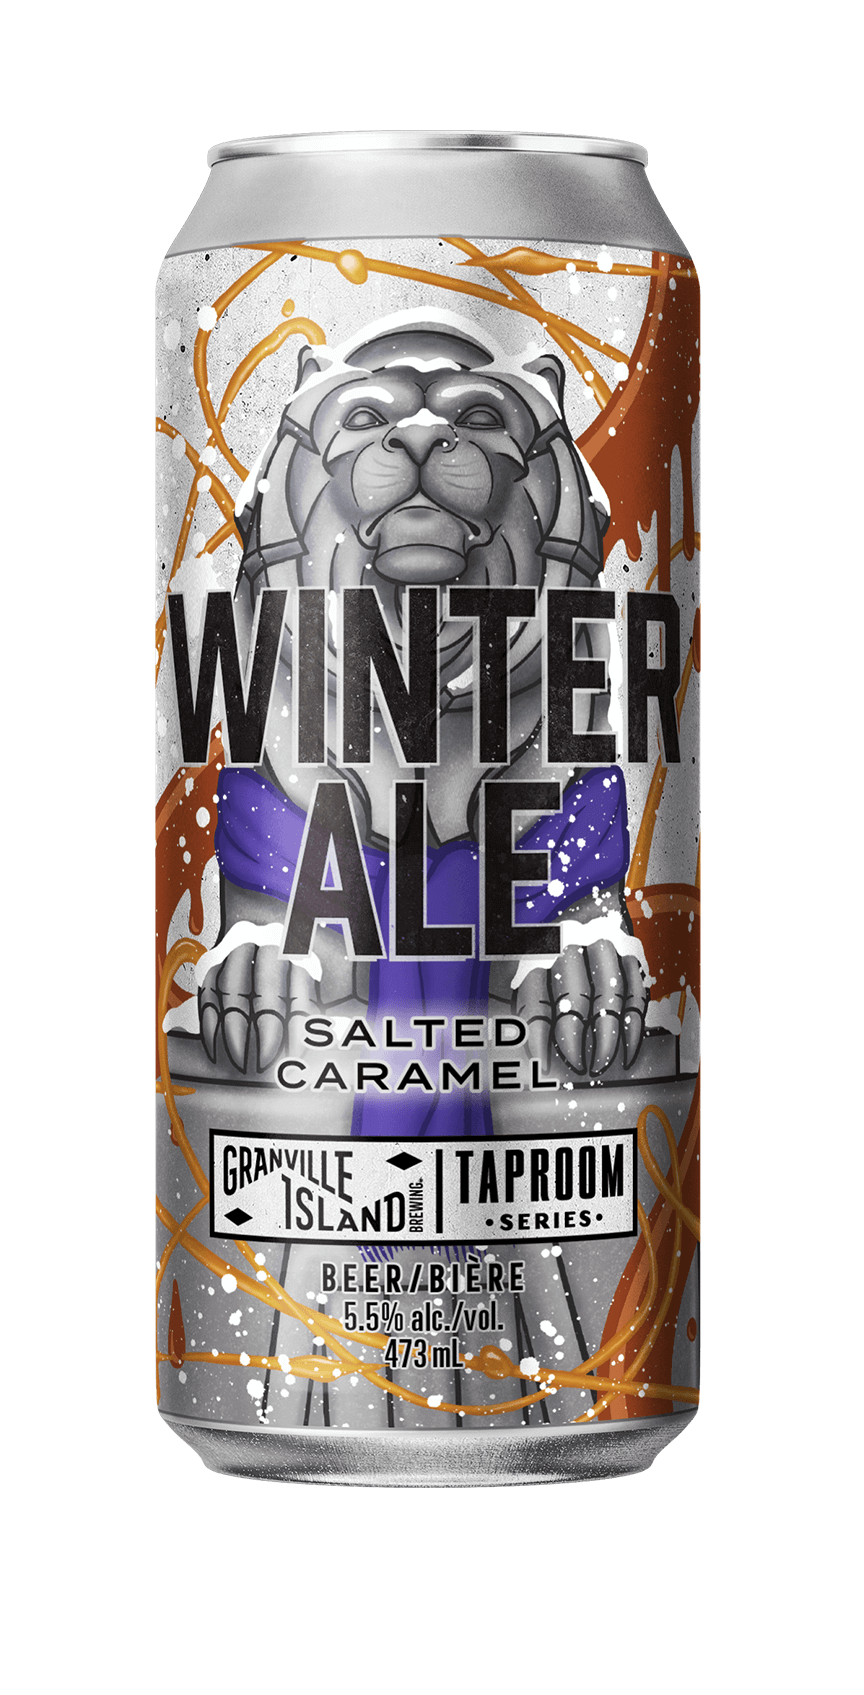 Winter Ale Salted Caramel beer can